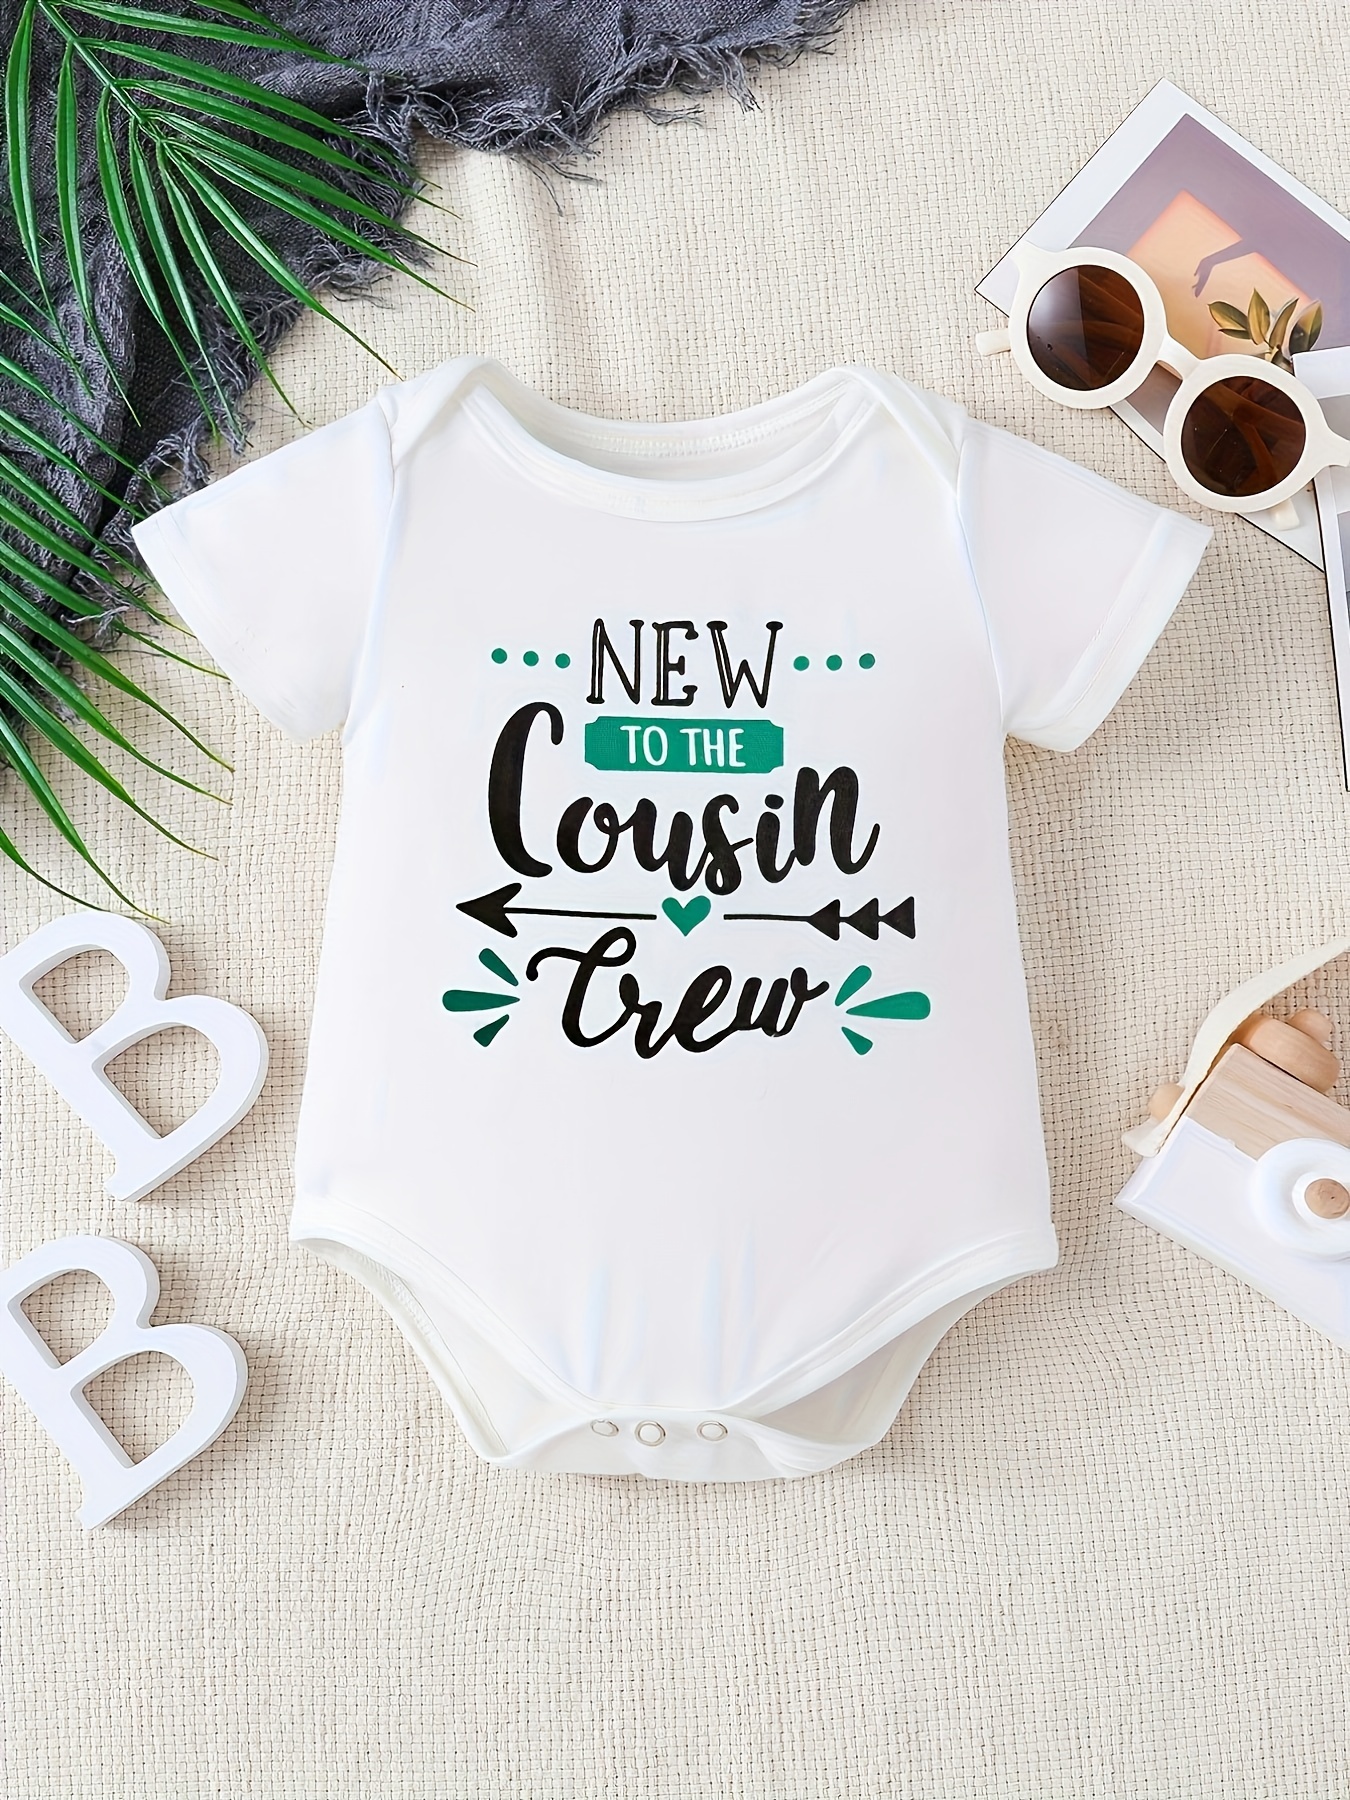 Baby Girls Boys 1st Birthday Cute Bodysuits, Short Sleeve Cotton T-shirt  Spring Summer Autumn Infant Jumpsuits Kids Party Clothes